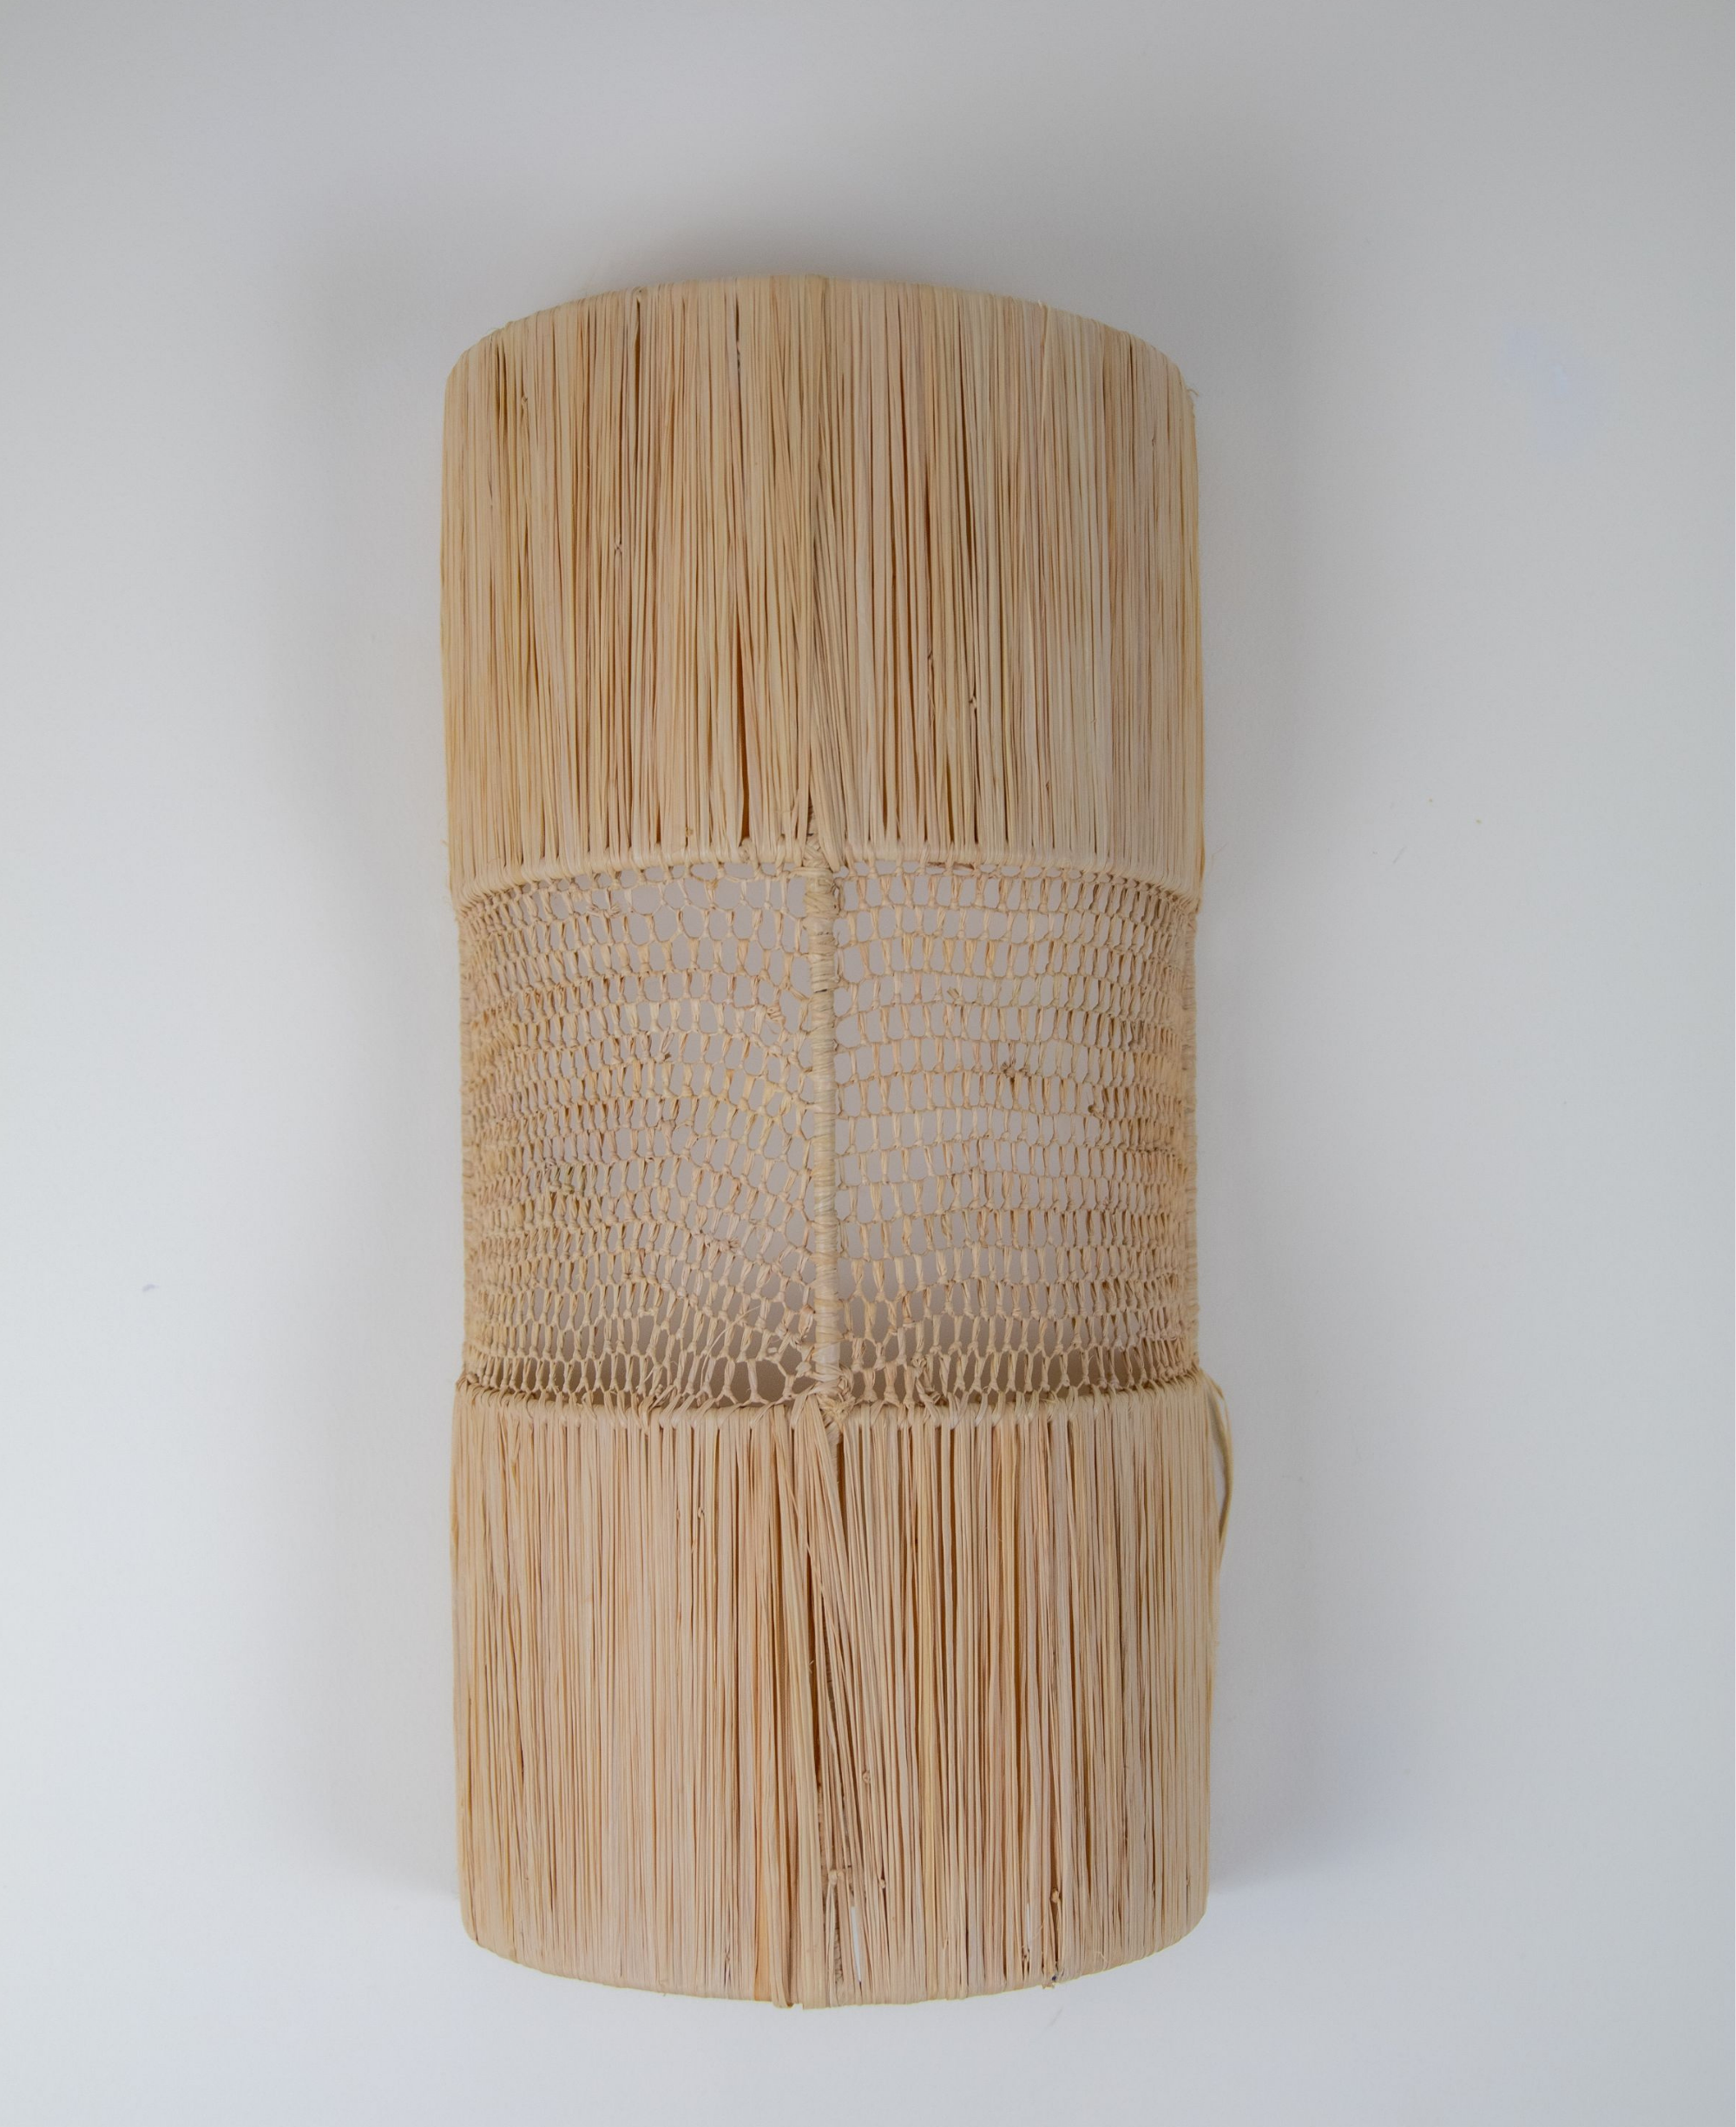 Raffia Wall Light Fixture: Stylish Wicker Lampshade for Your Space